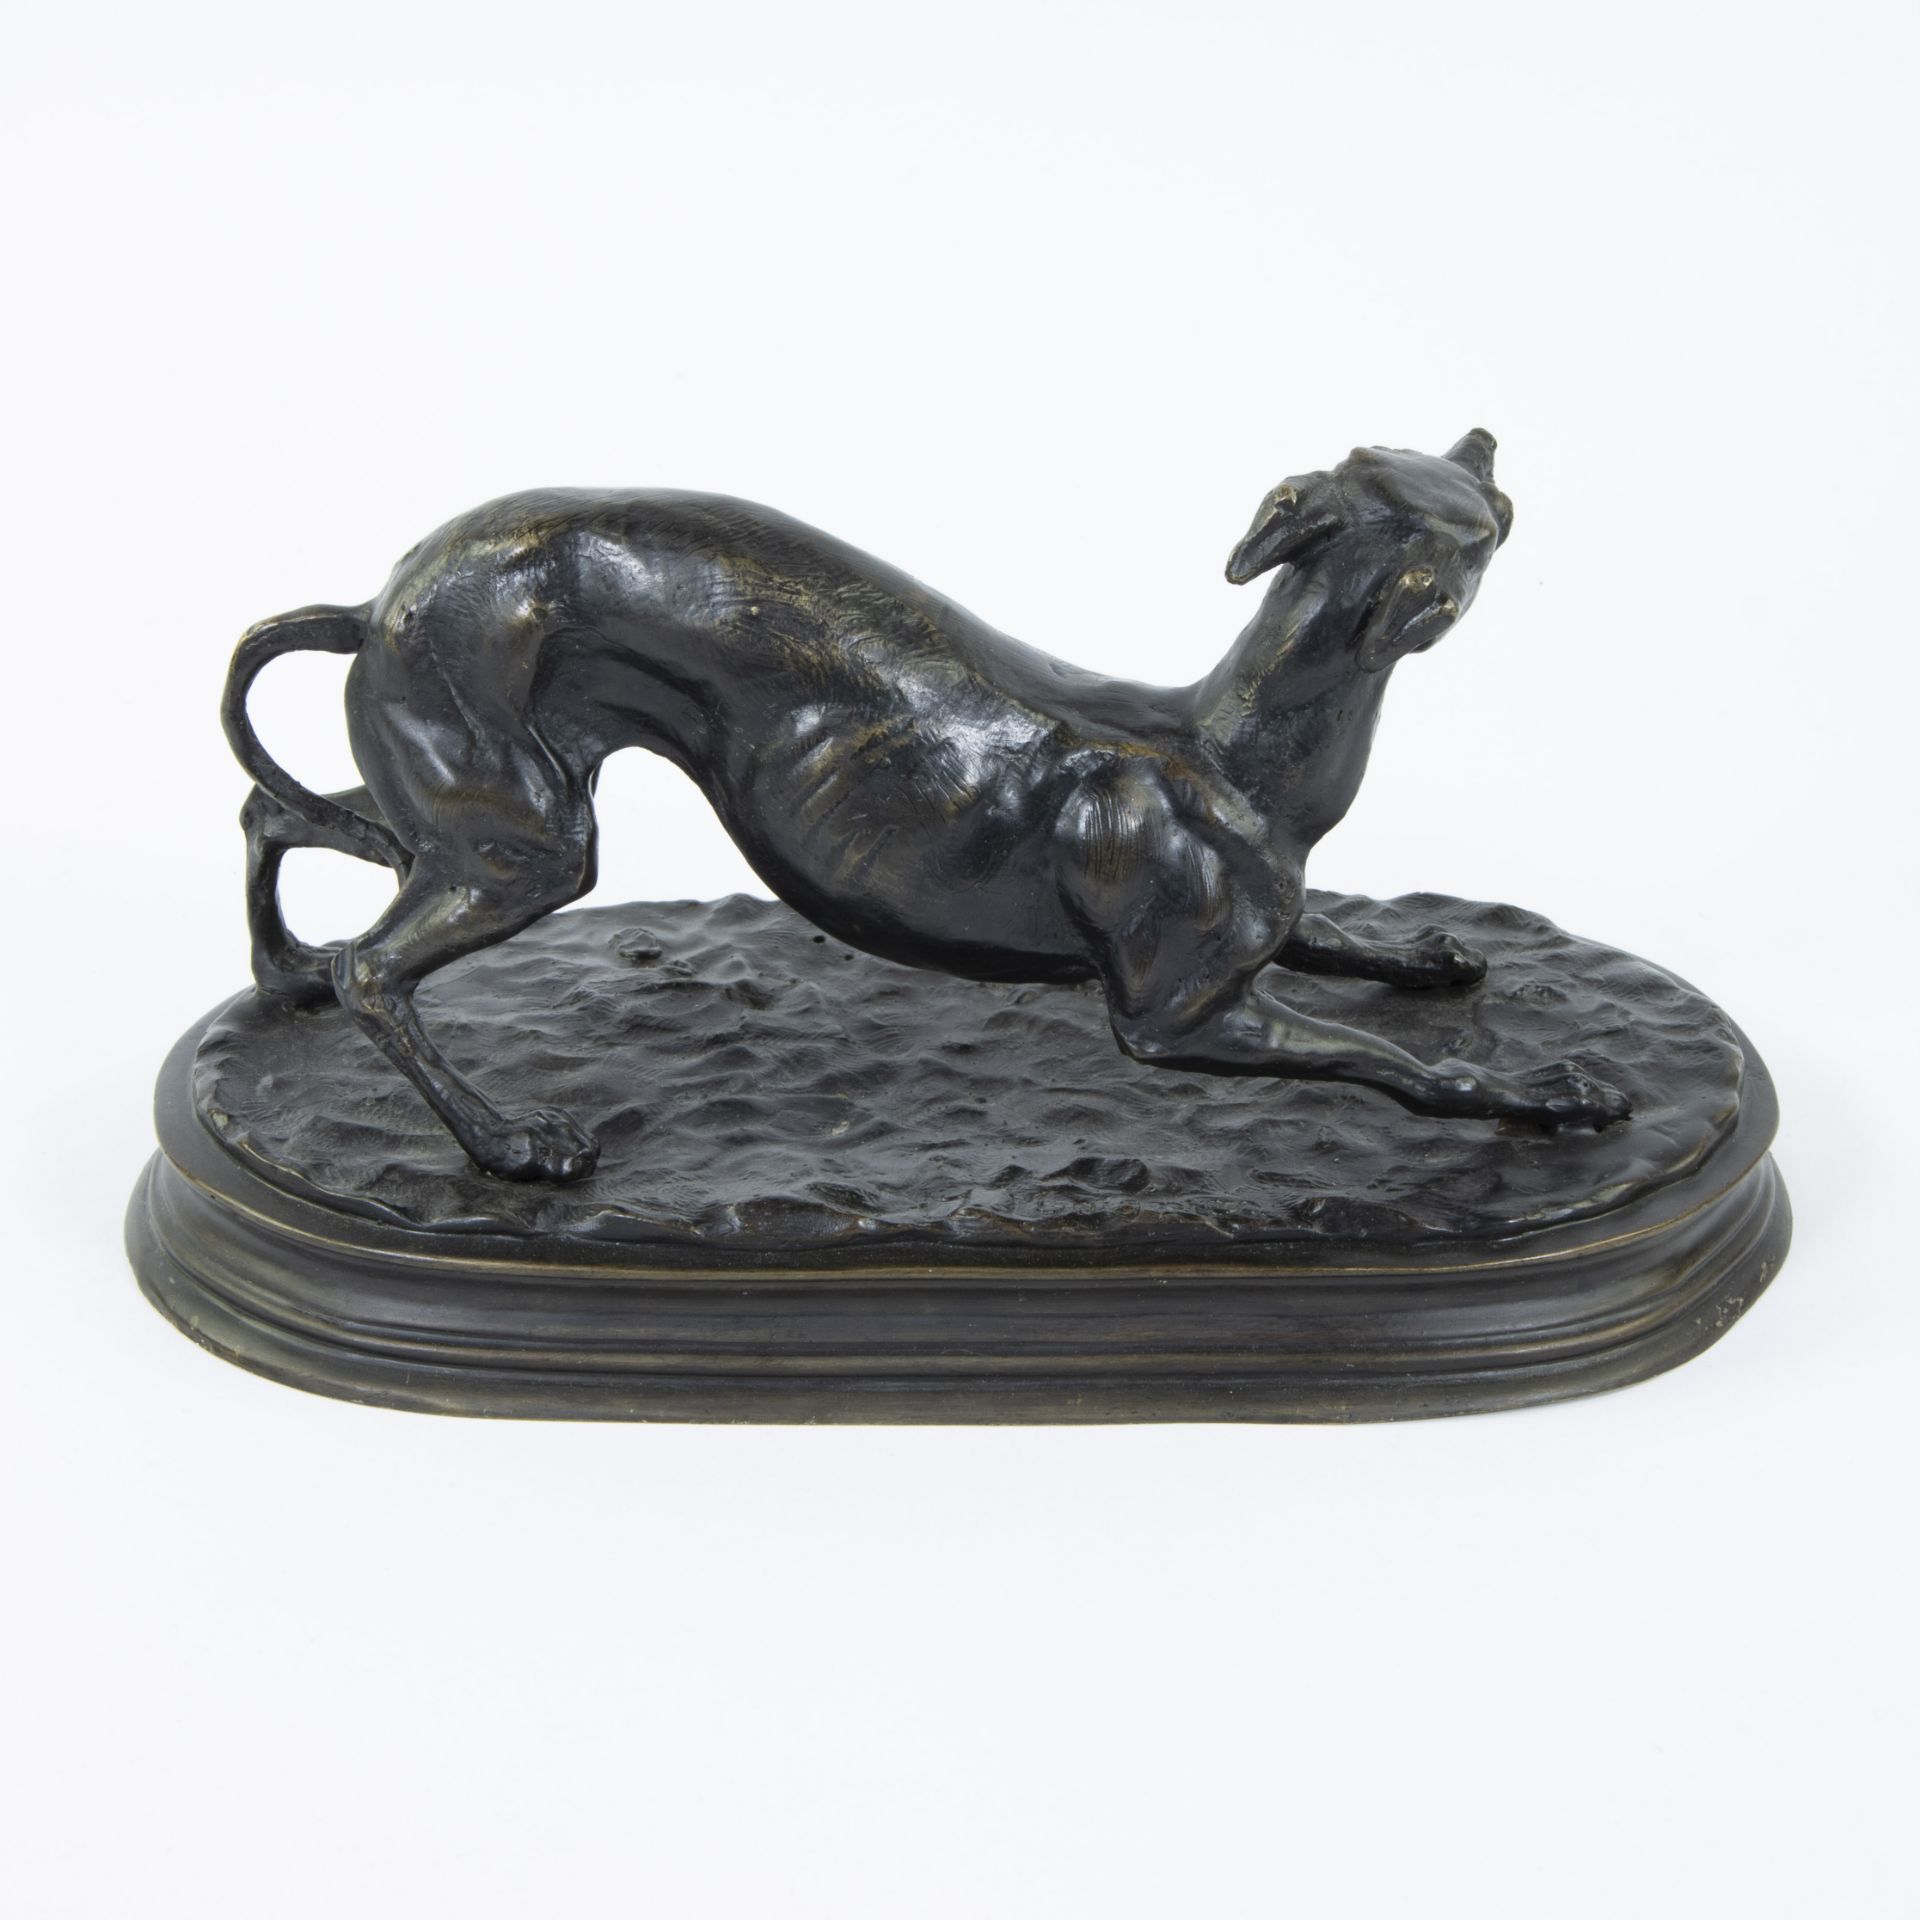 Jules MOIGNIEZ (1835-1894), bronze sculpture of a hound dog, signed - Image 3 of 5